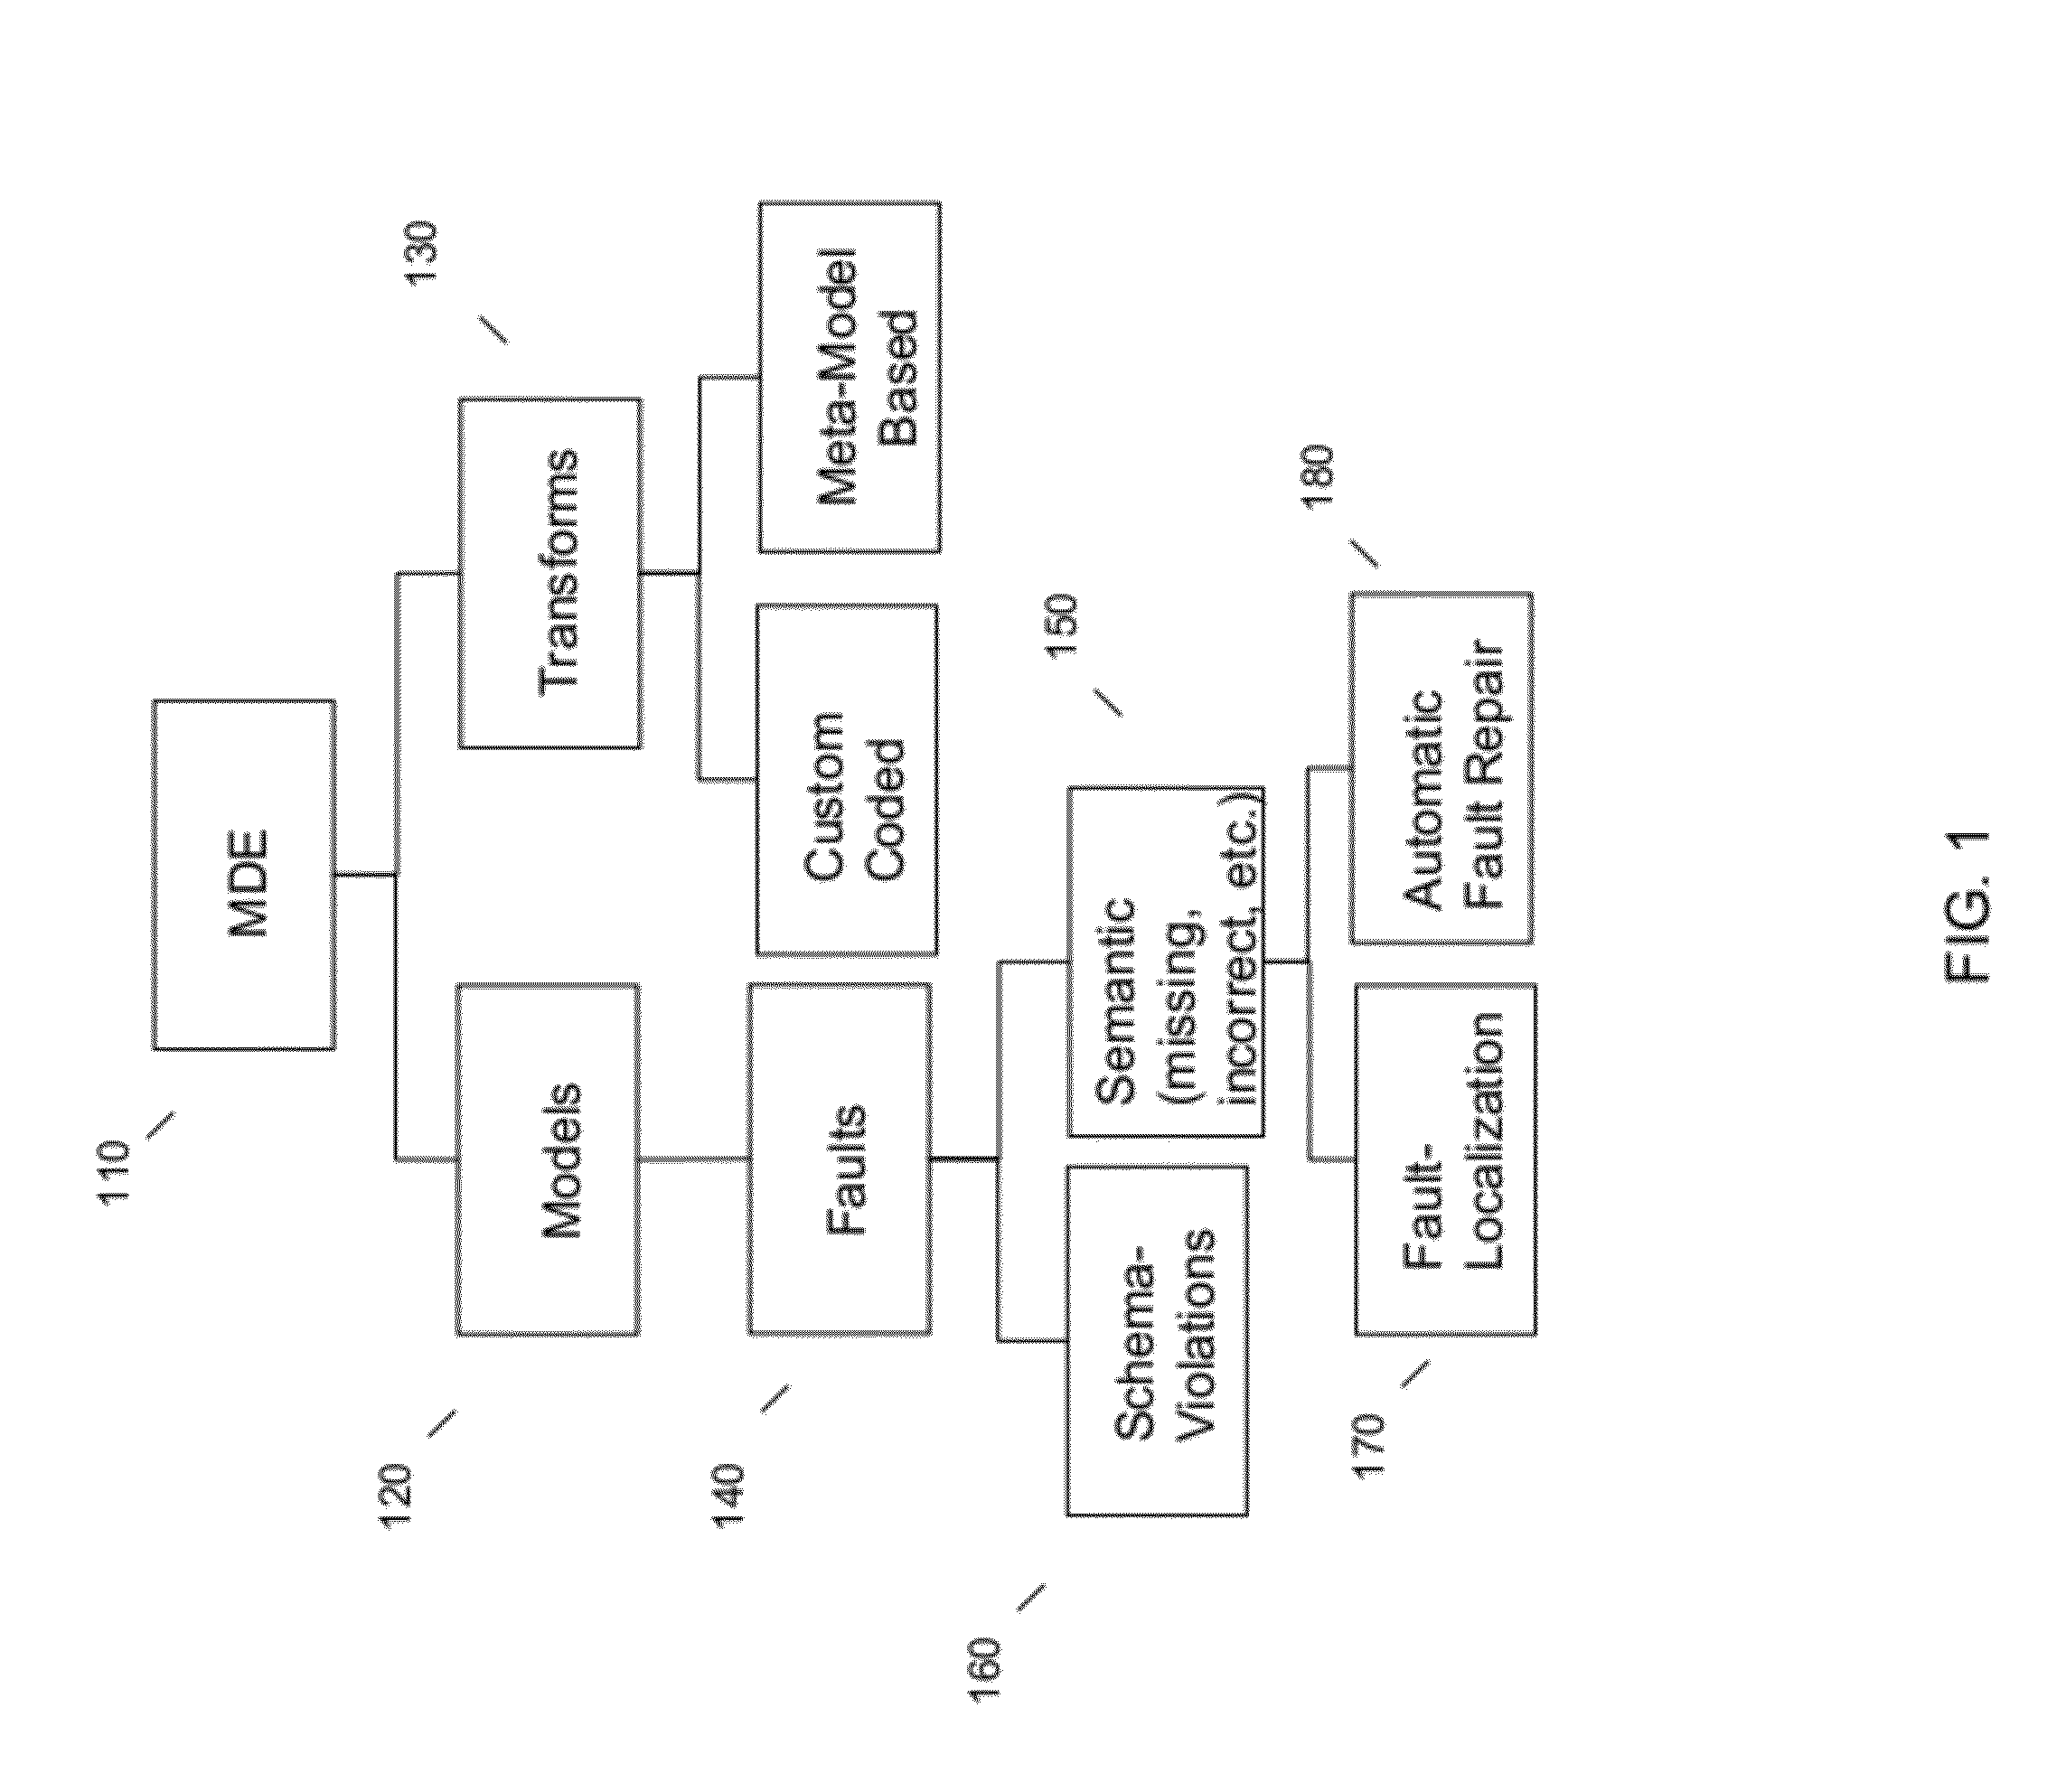 Systems and methods for automated support for repairing input model errors